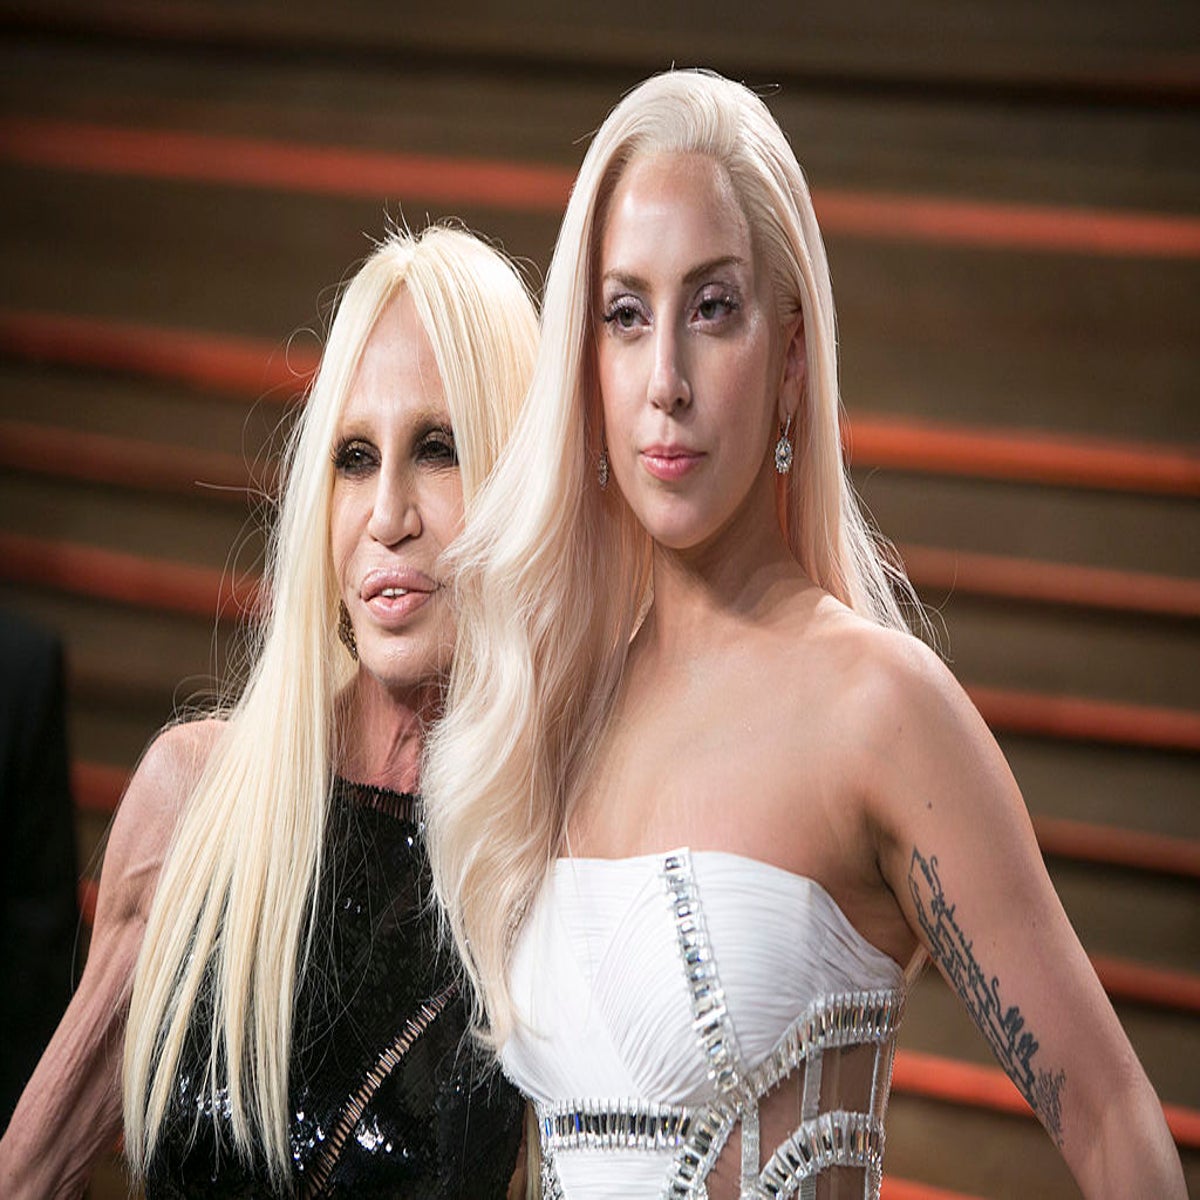 Lady Gaga Might Play Donatella Versace in 'American Crime Story